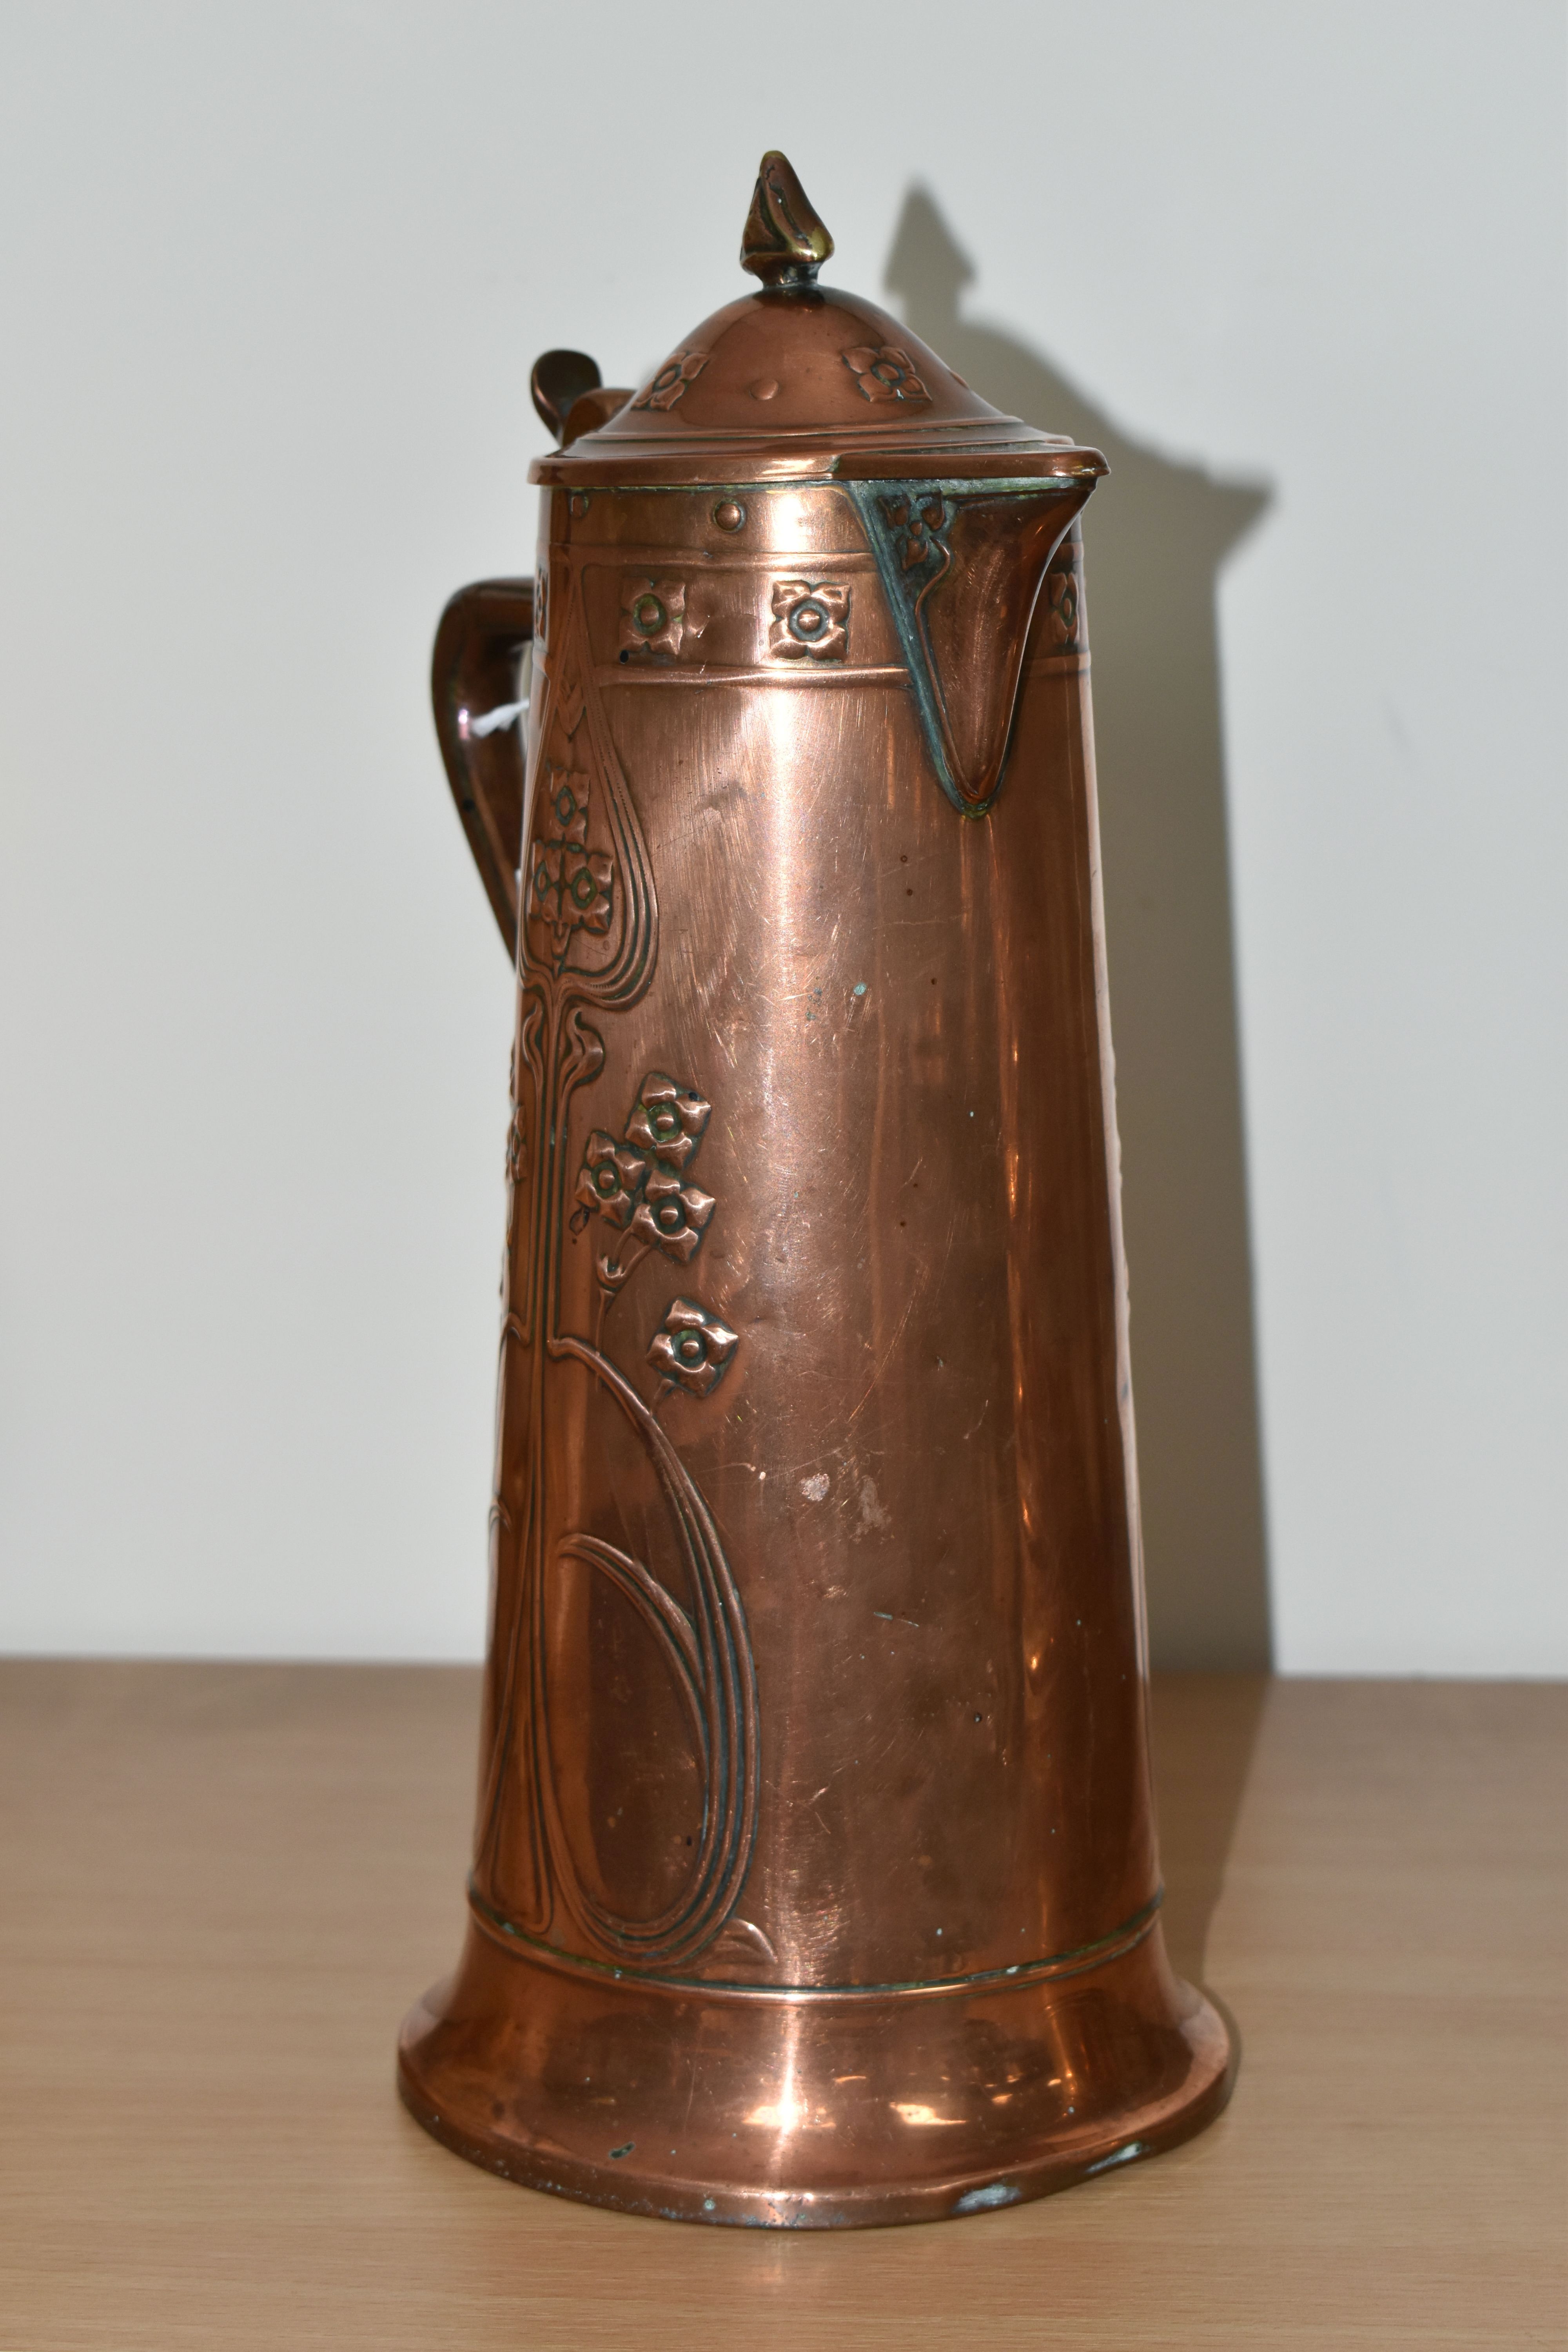 AN ART NOUVEAU COPPER JUG BY JOSEPH SANKEY & SONS, of covered tapering form, with stylised Art - Image 2 of 5